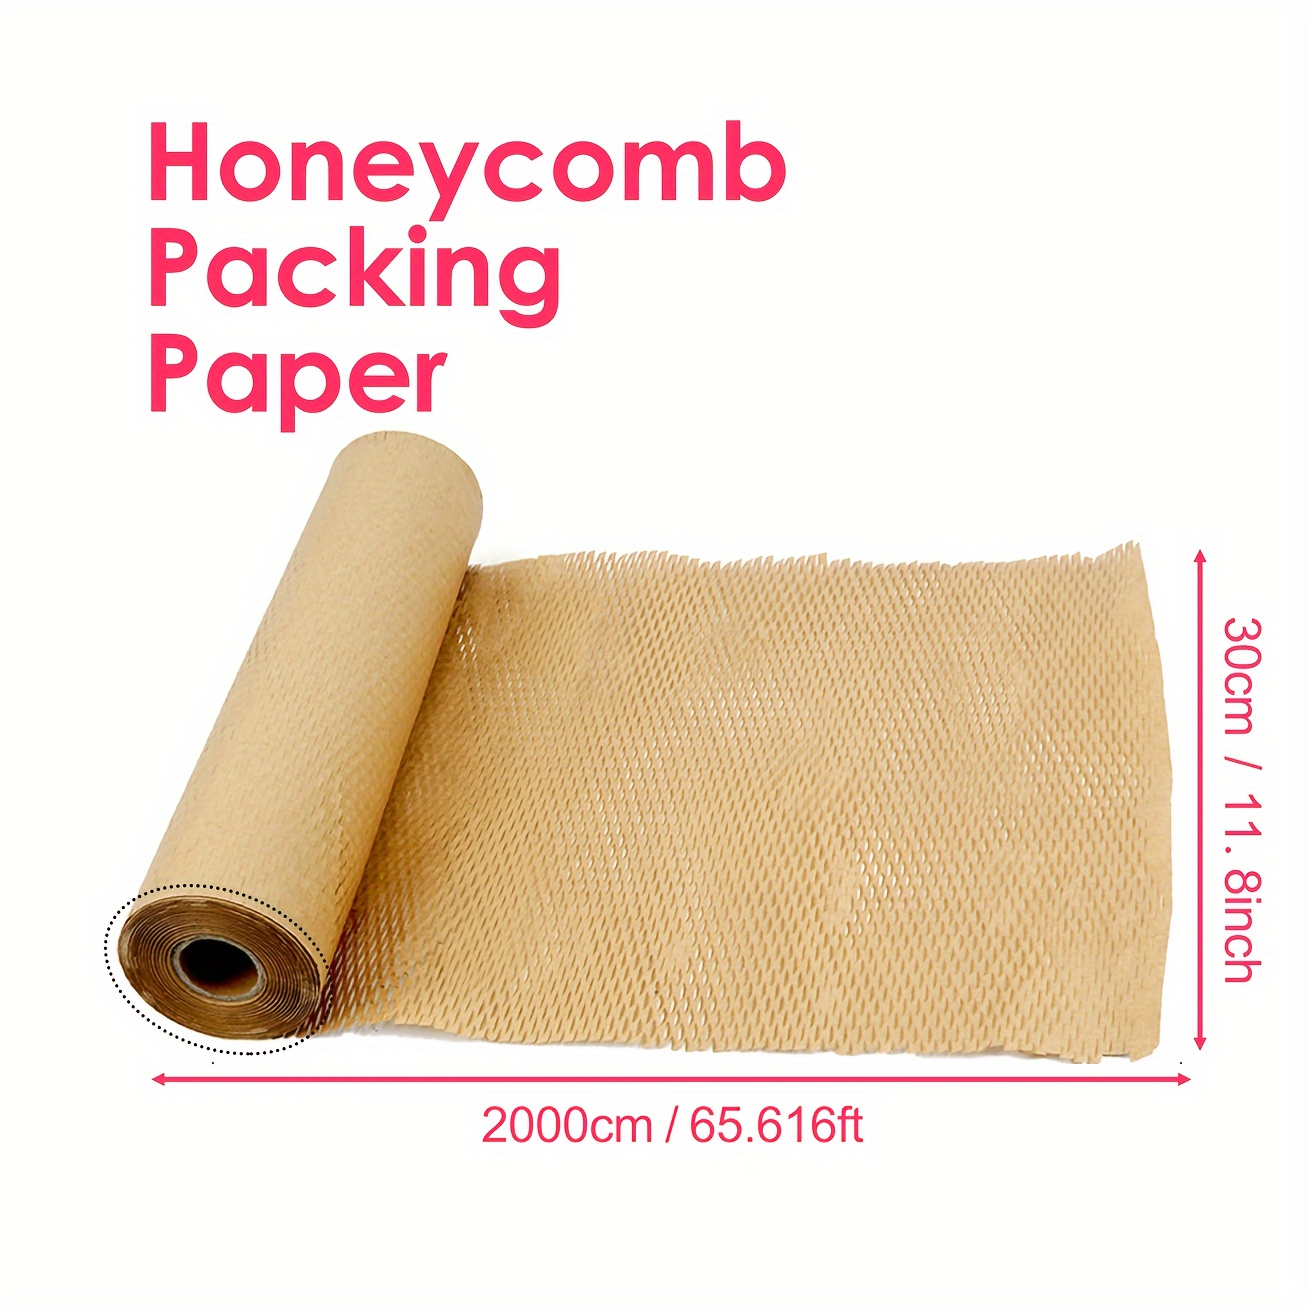 Honeycomb Packing Paper - Colored